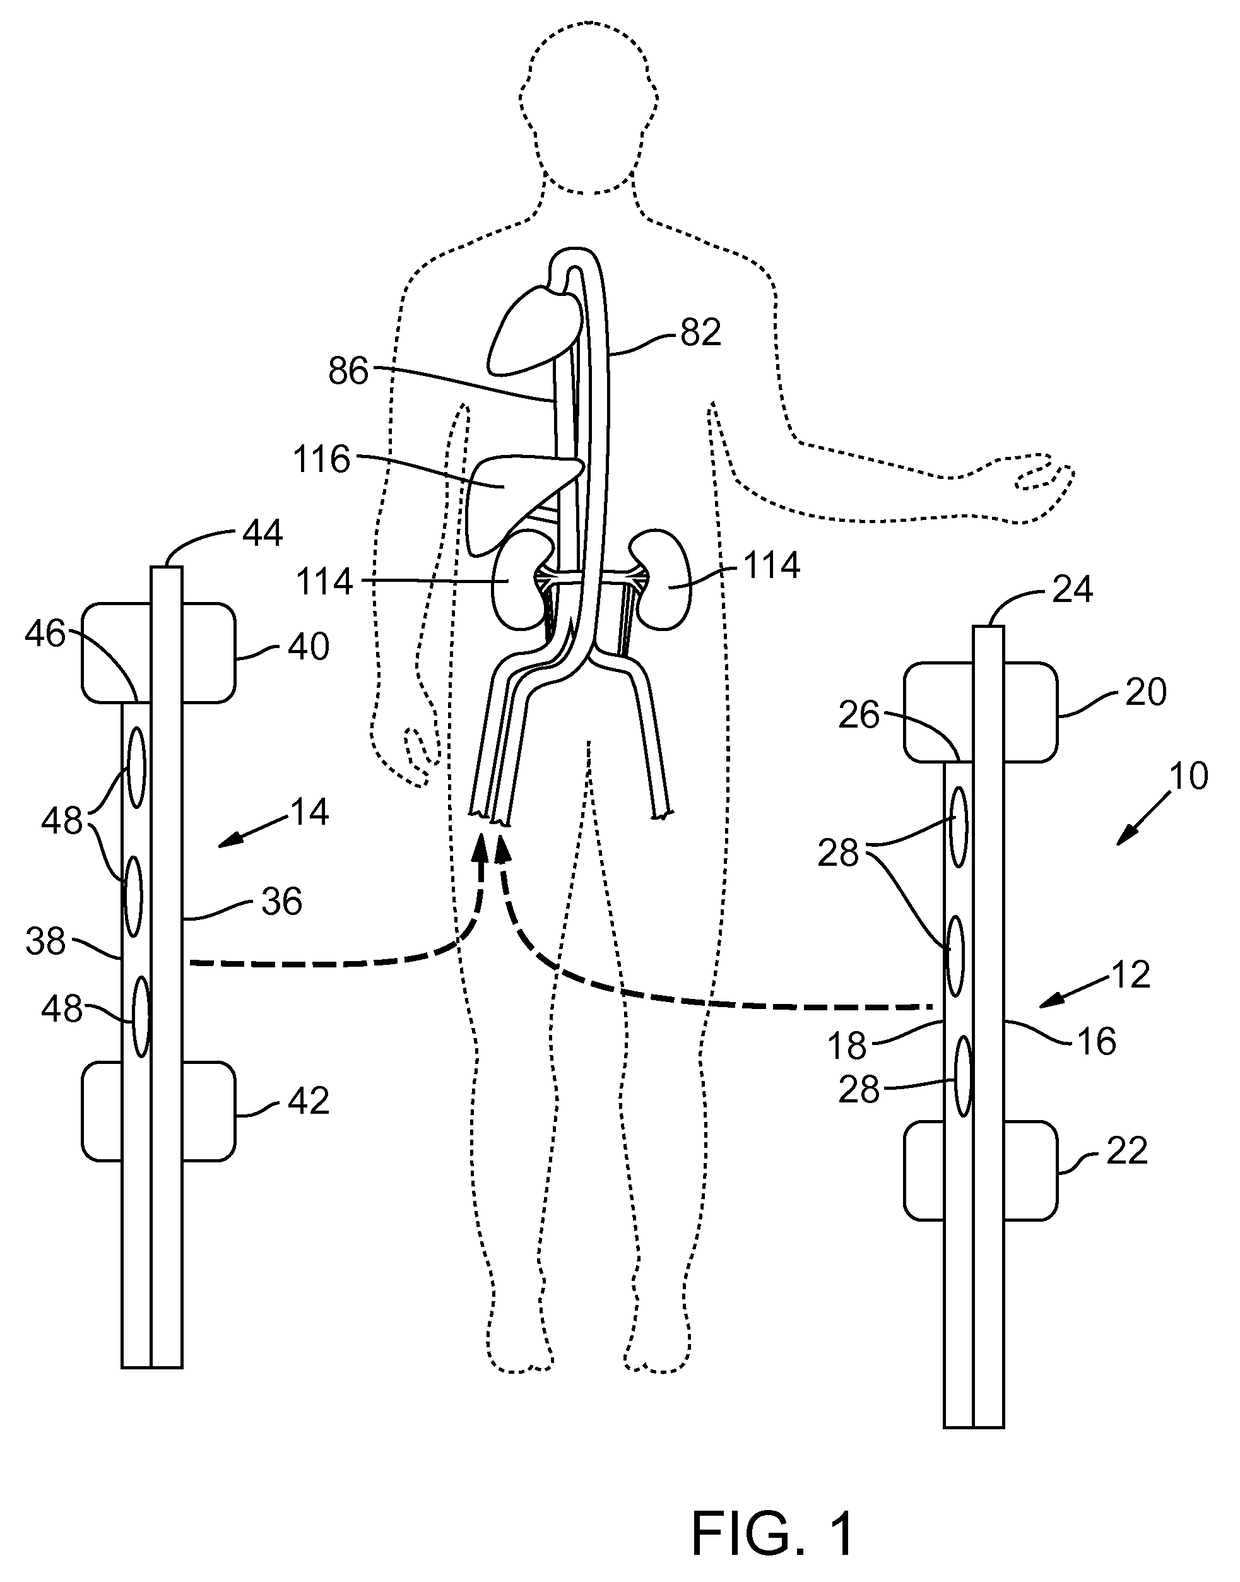 Endovascular apparatus for perfusing organs in a body